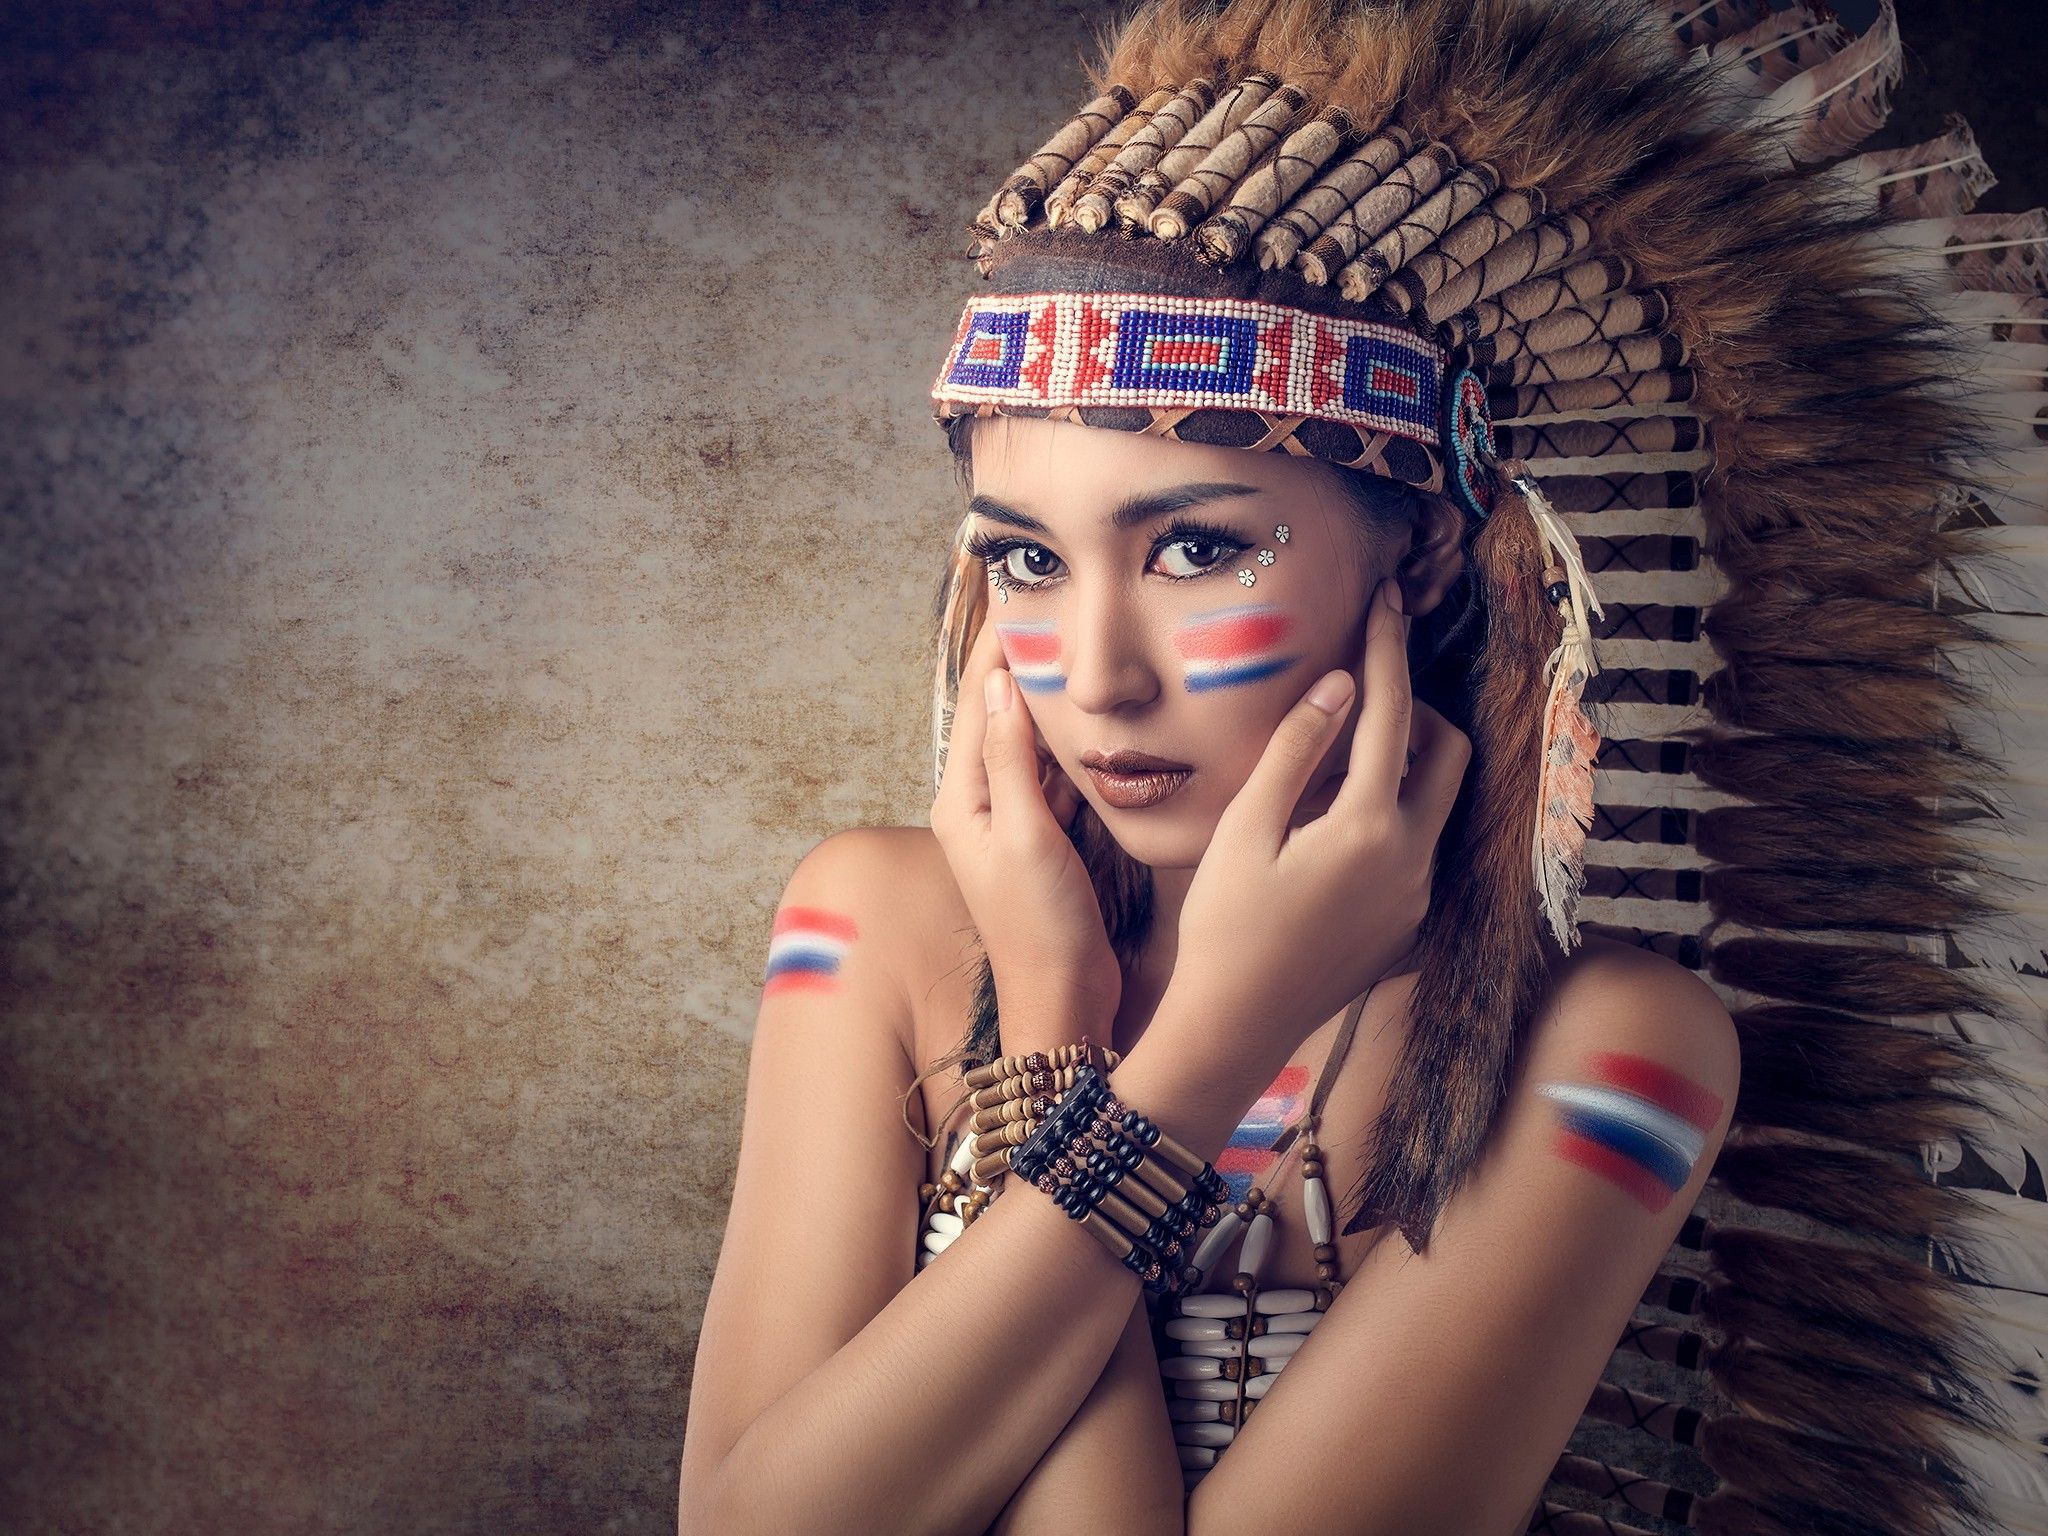 Asian, Women, Model, Native American Clothing Wallpaper HD / Desktop and Mobile Background